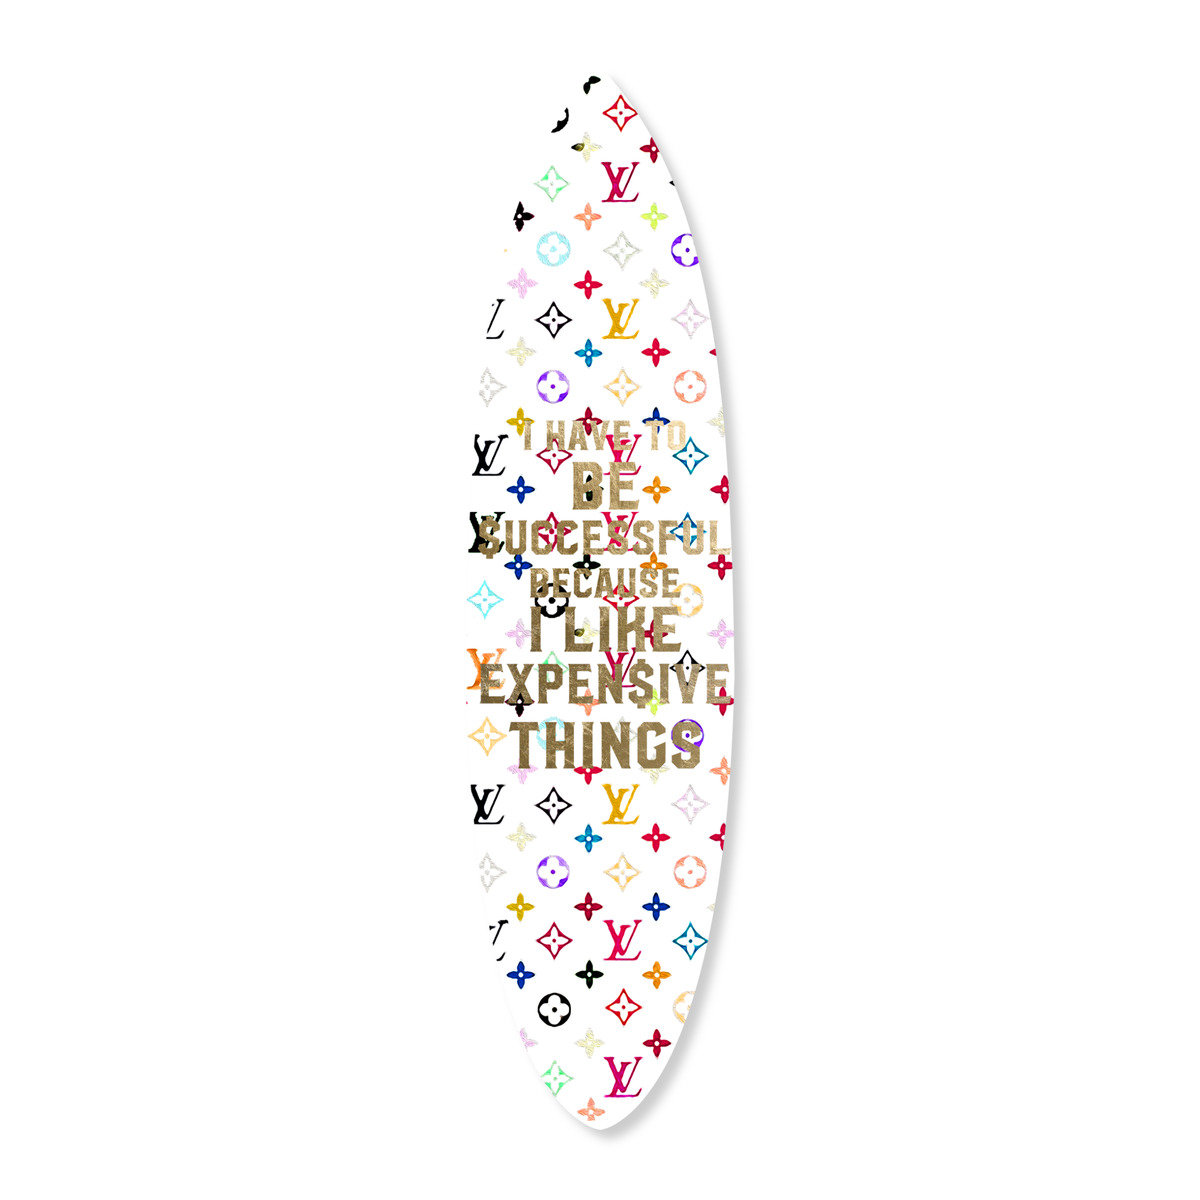 Dutch Refresh Florals Light Surfboard Flat  Floral and Botanical Wall Art  by The Oliver Gal